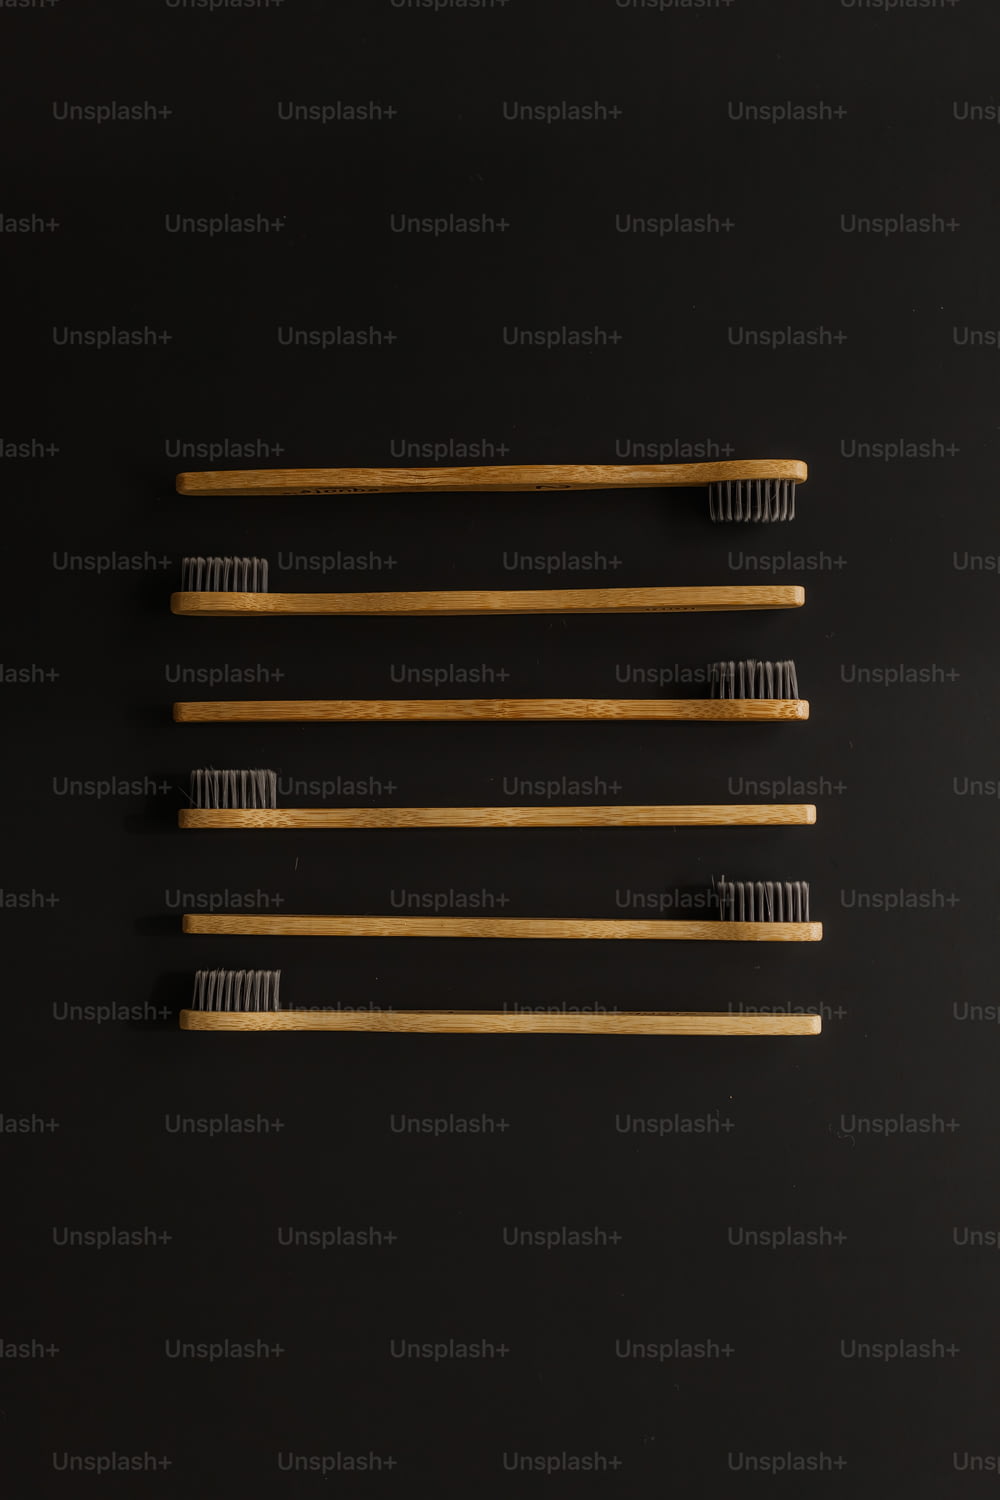 four toothbrushes lined up on a black surface